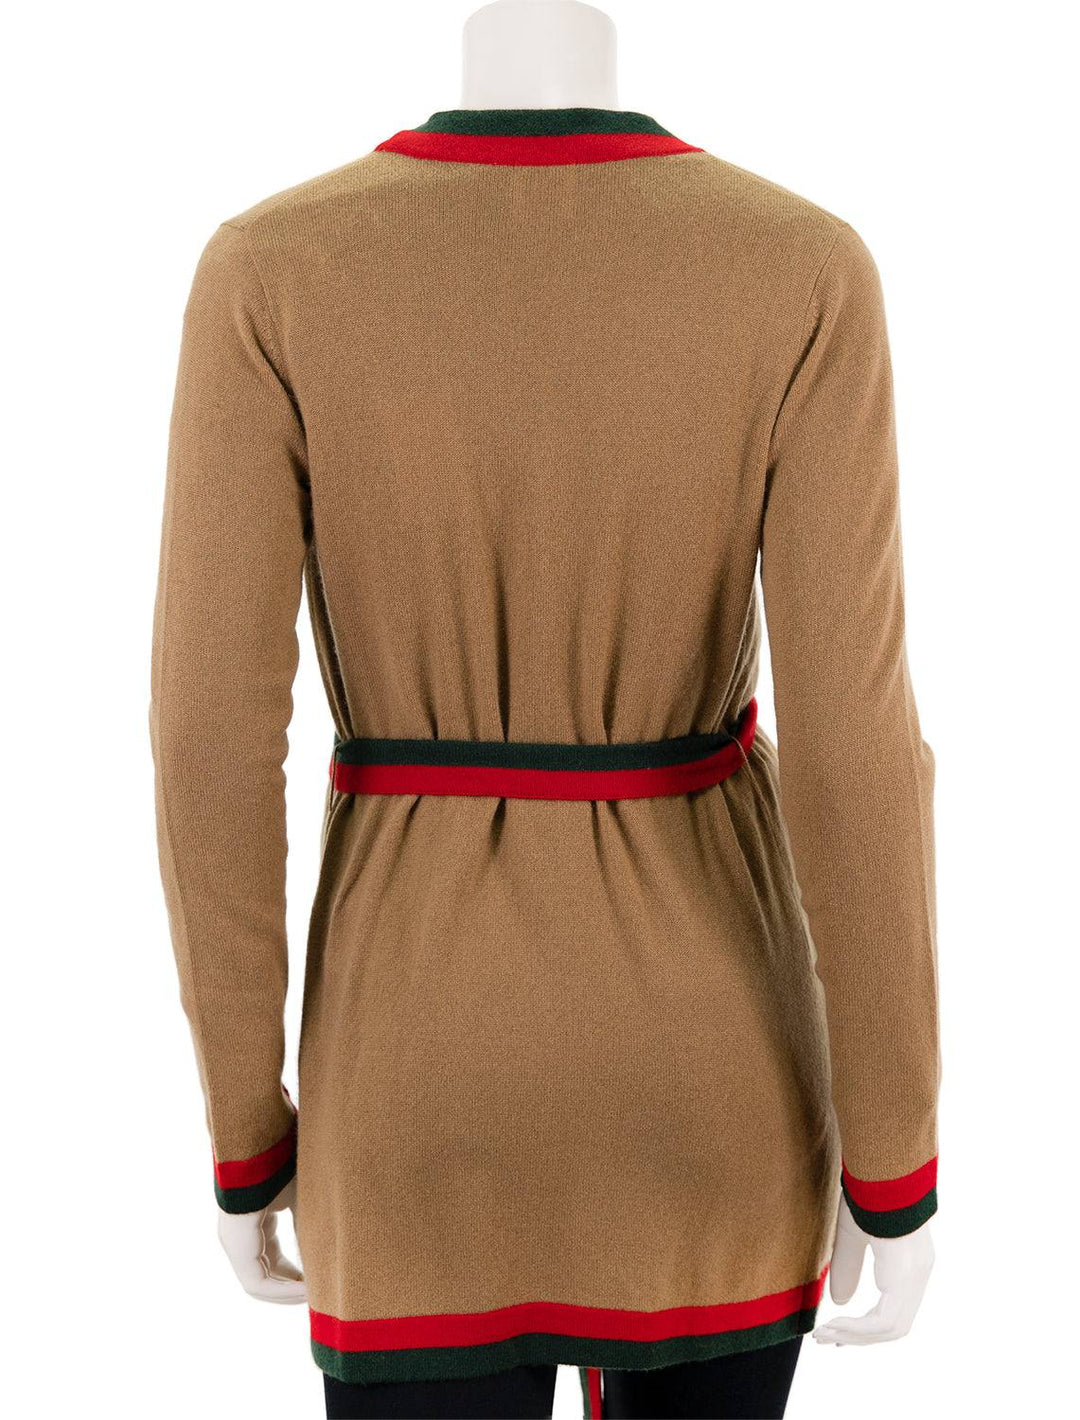 Back view of Madeline Thompson's rowen cardigan in camel stripe.